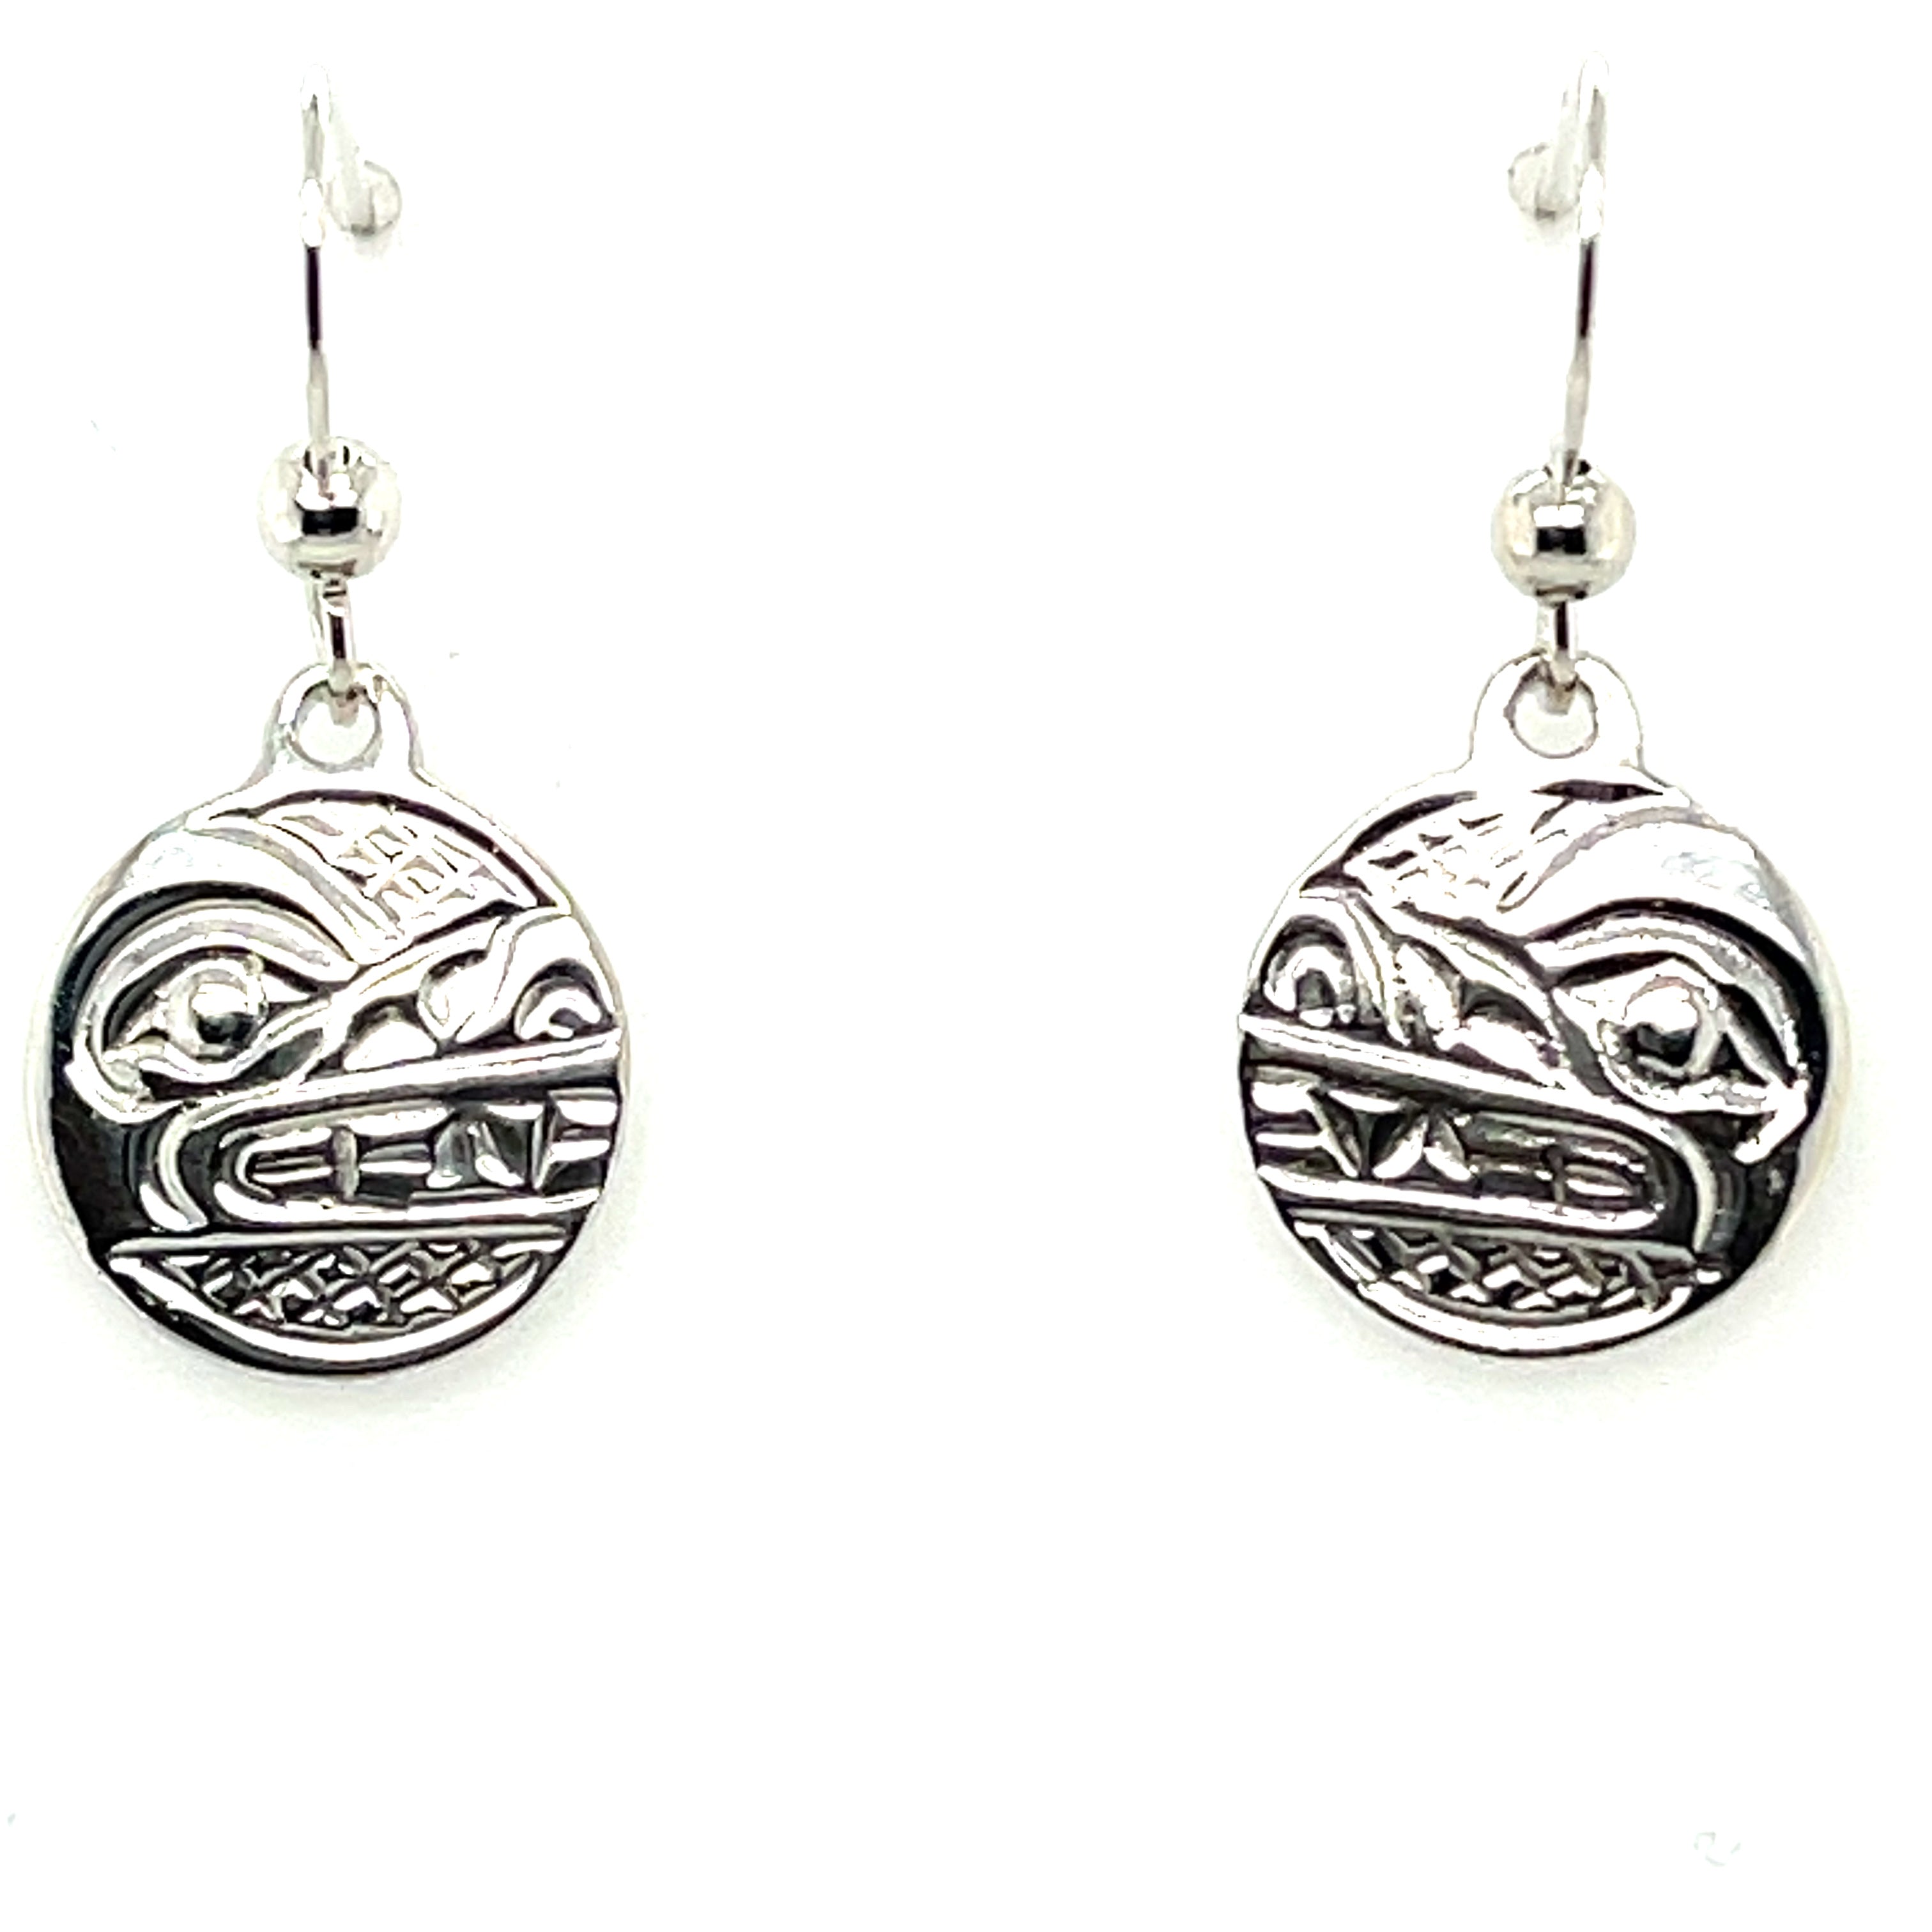 Earrings - Sterling Silver - Drop - Small - Round - Wolf